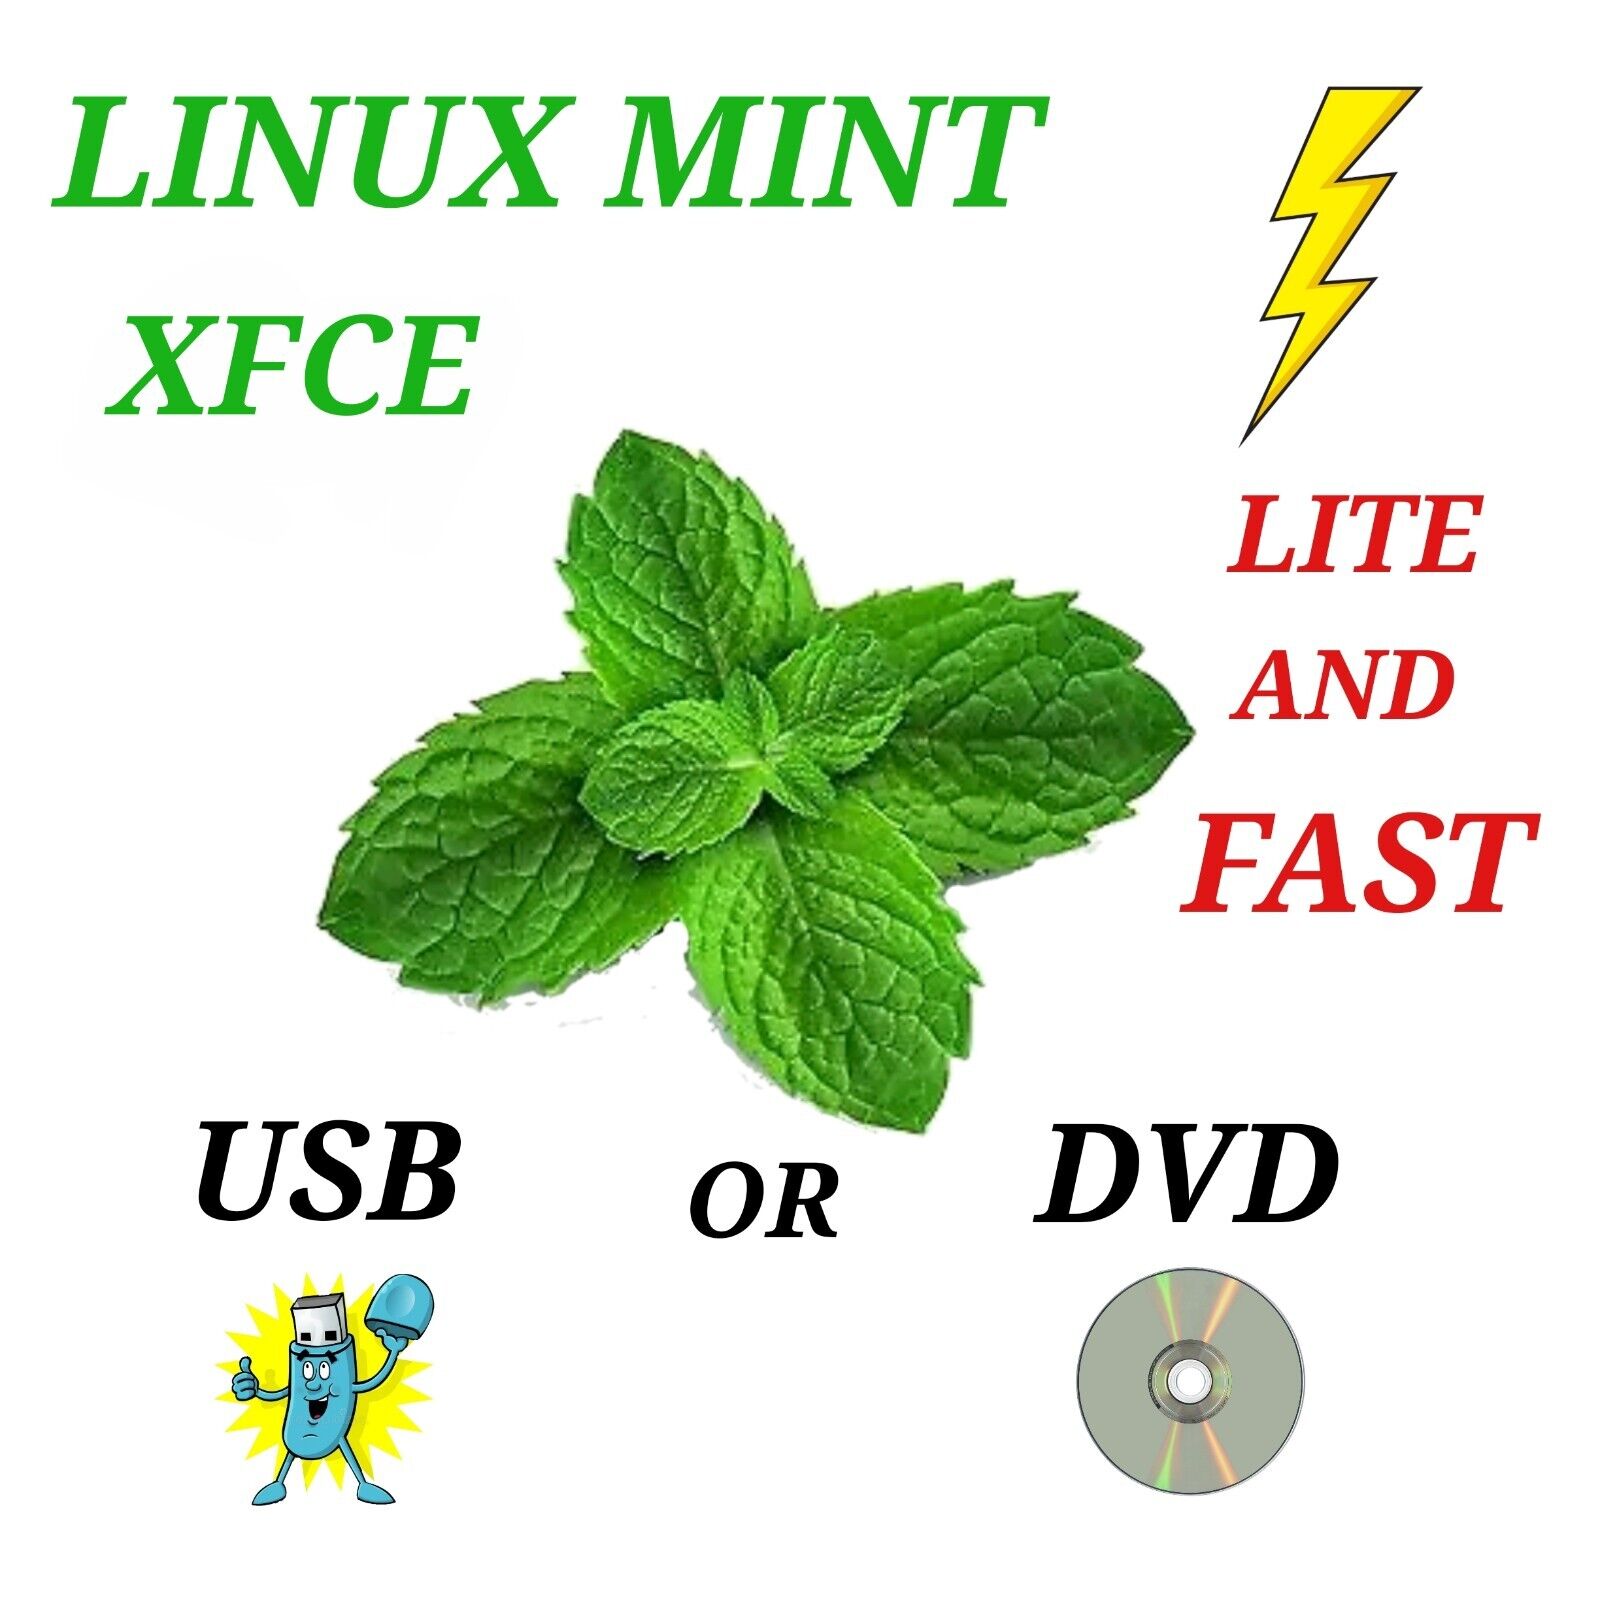 LINUX MINT XFCE, BOOTABLE USB/DVD, LITE AND FAST